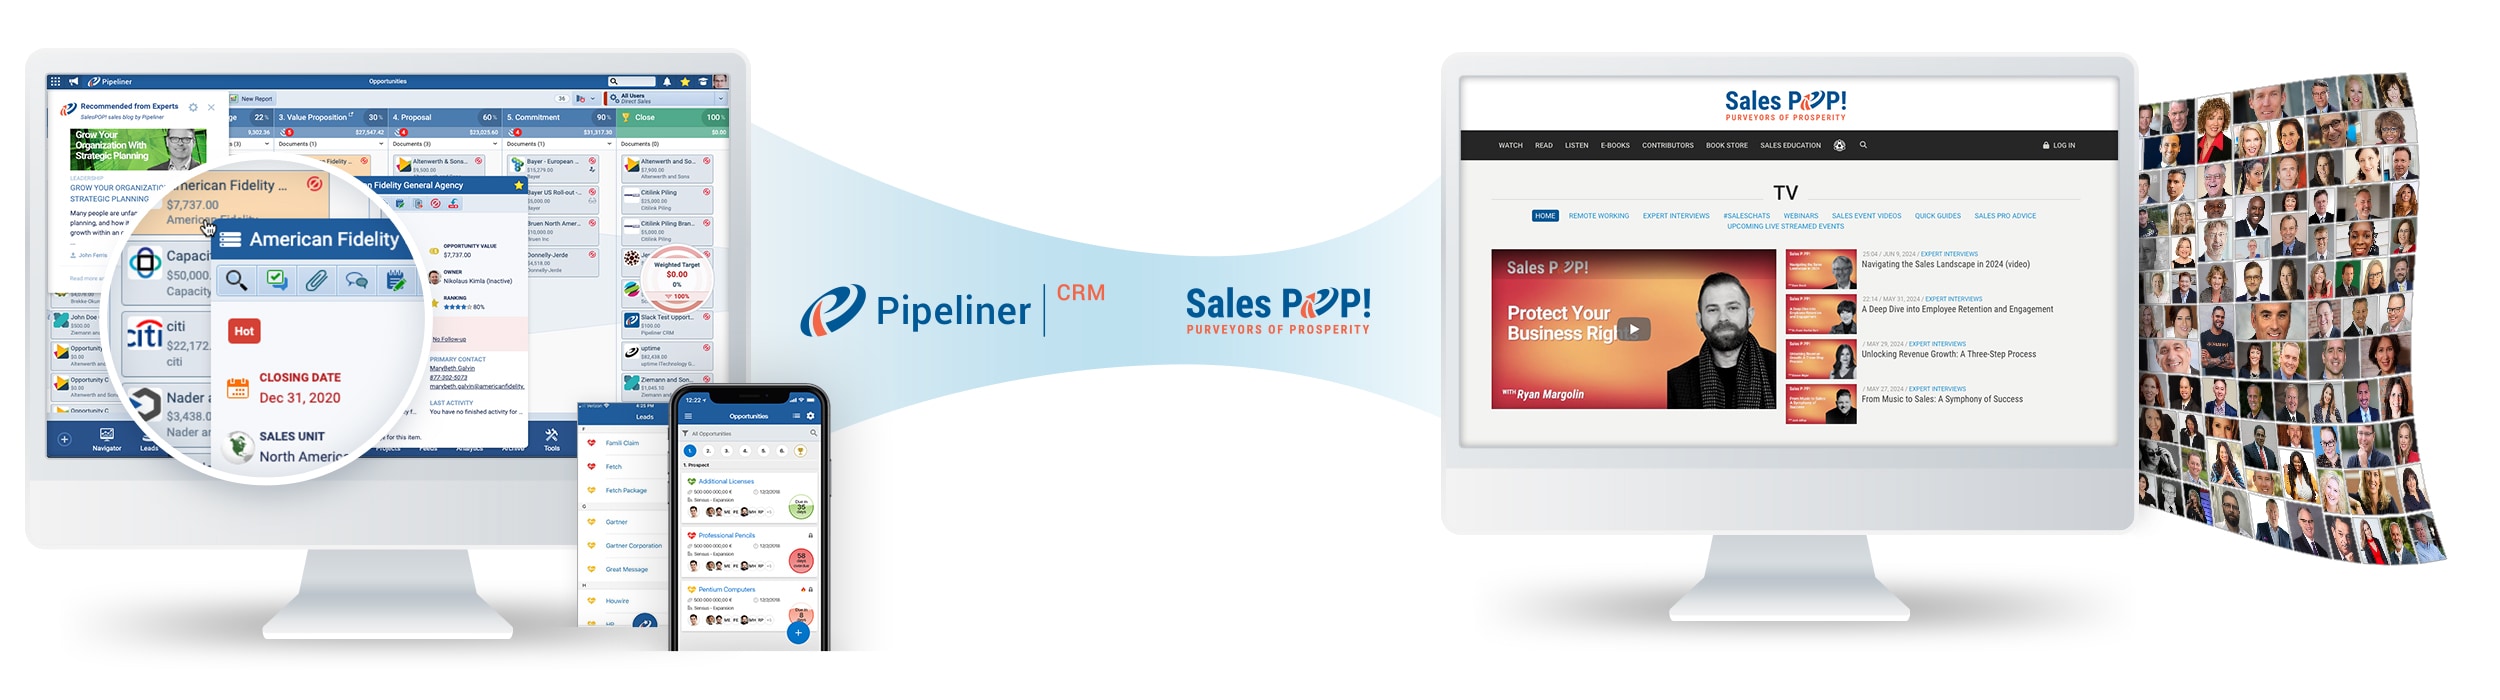 Pipeliner CRM for Sales - Pipeline, Lead and Contact Management visual interface